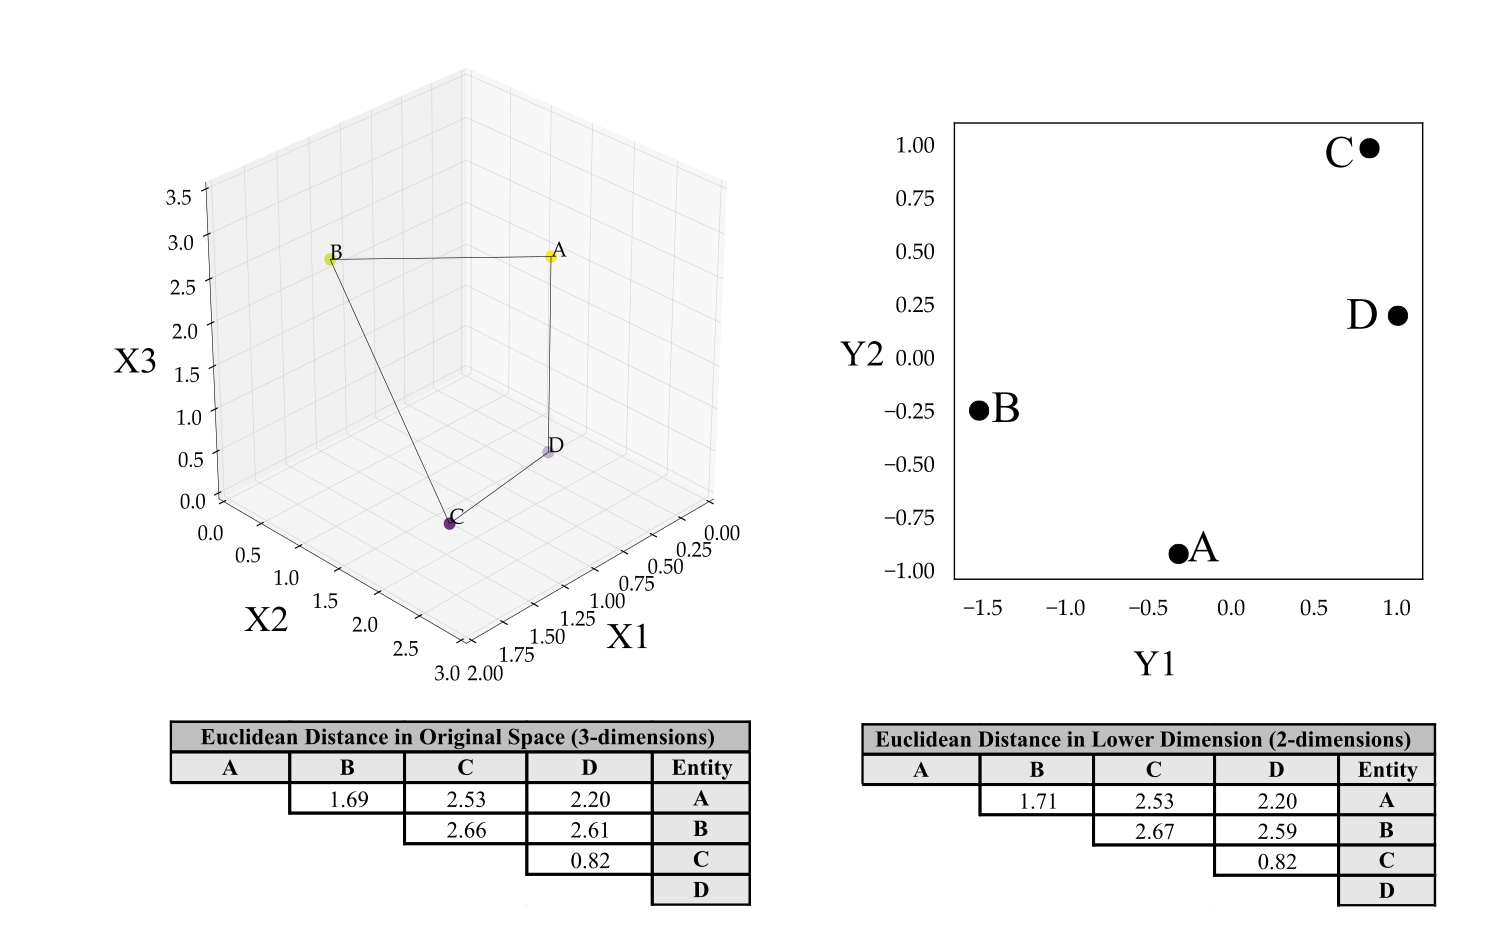 Left: Original 3-dimensional space with 4 points defined by 3 variables (X1,X2,X3) and input distance matrix. Right: Embedding using MDS to 2 dimensions (Y1,Y2) with resulting distance matrix showing a slight distortion in the distances